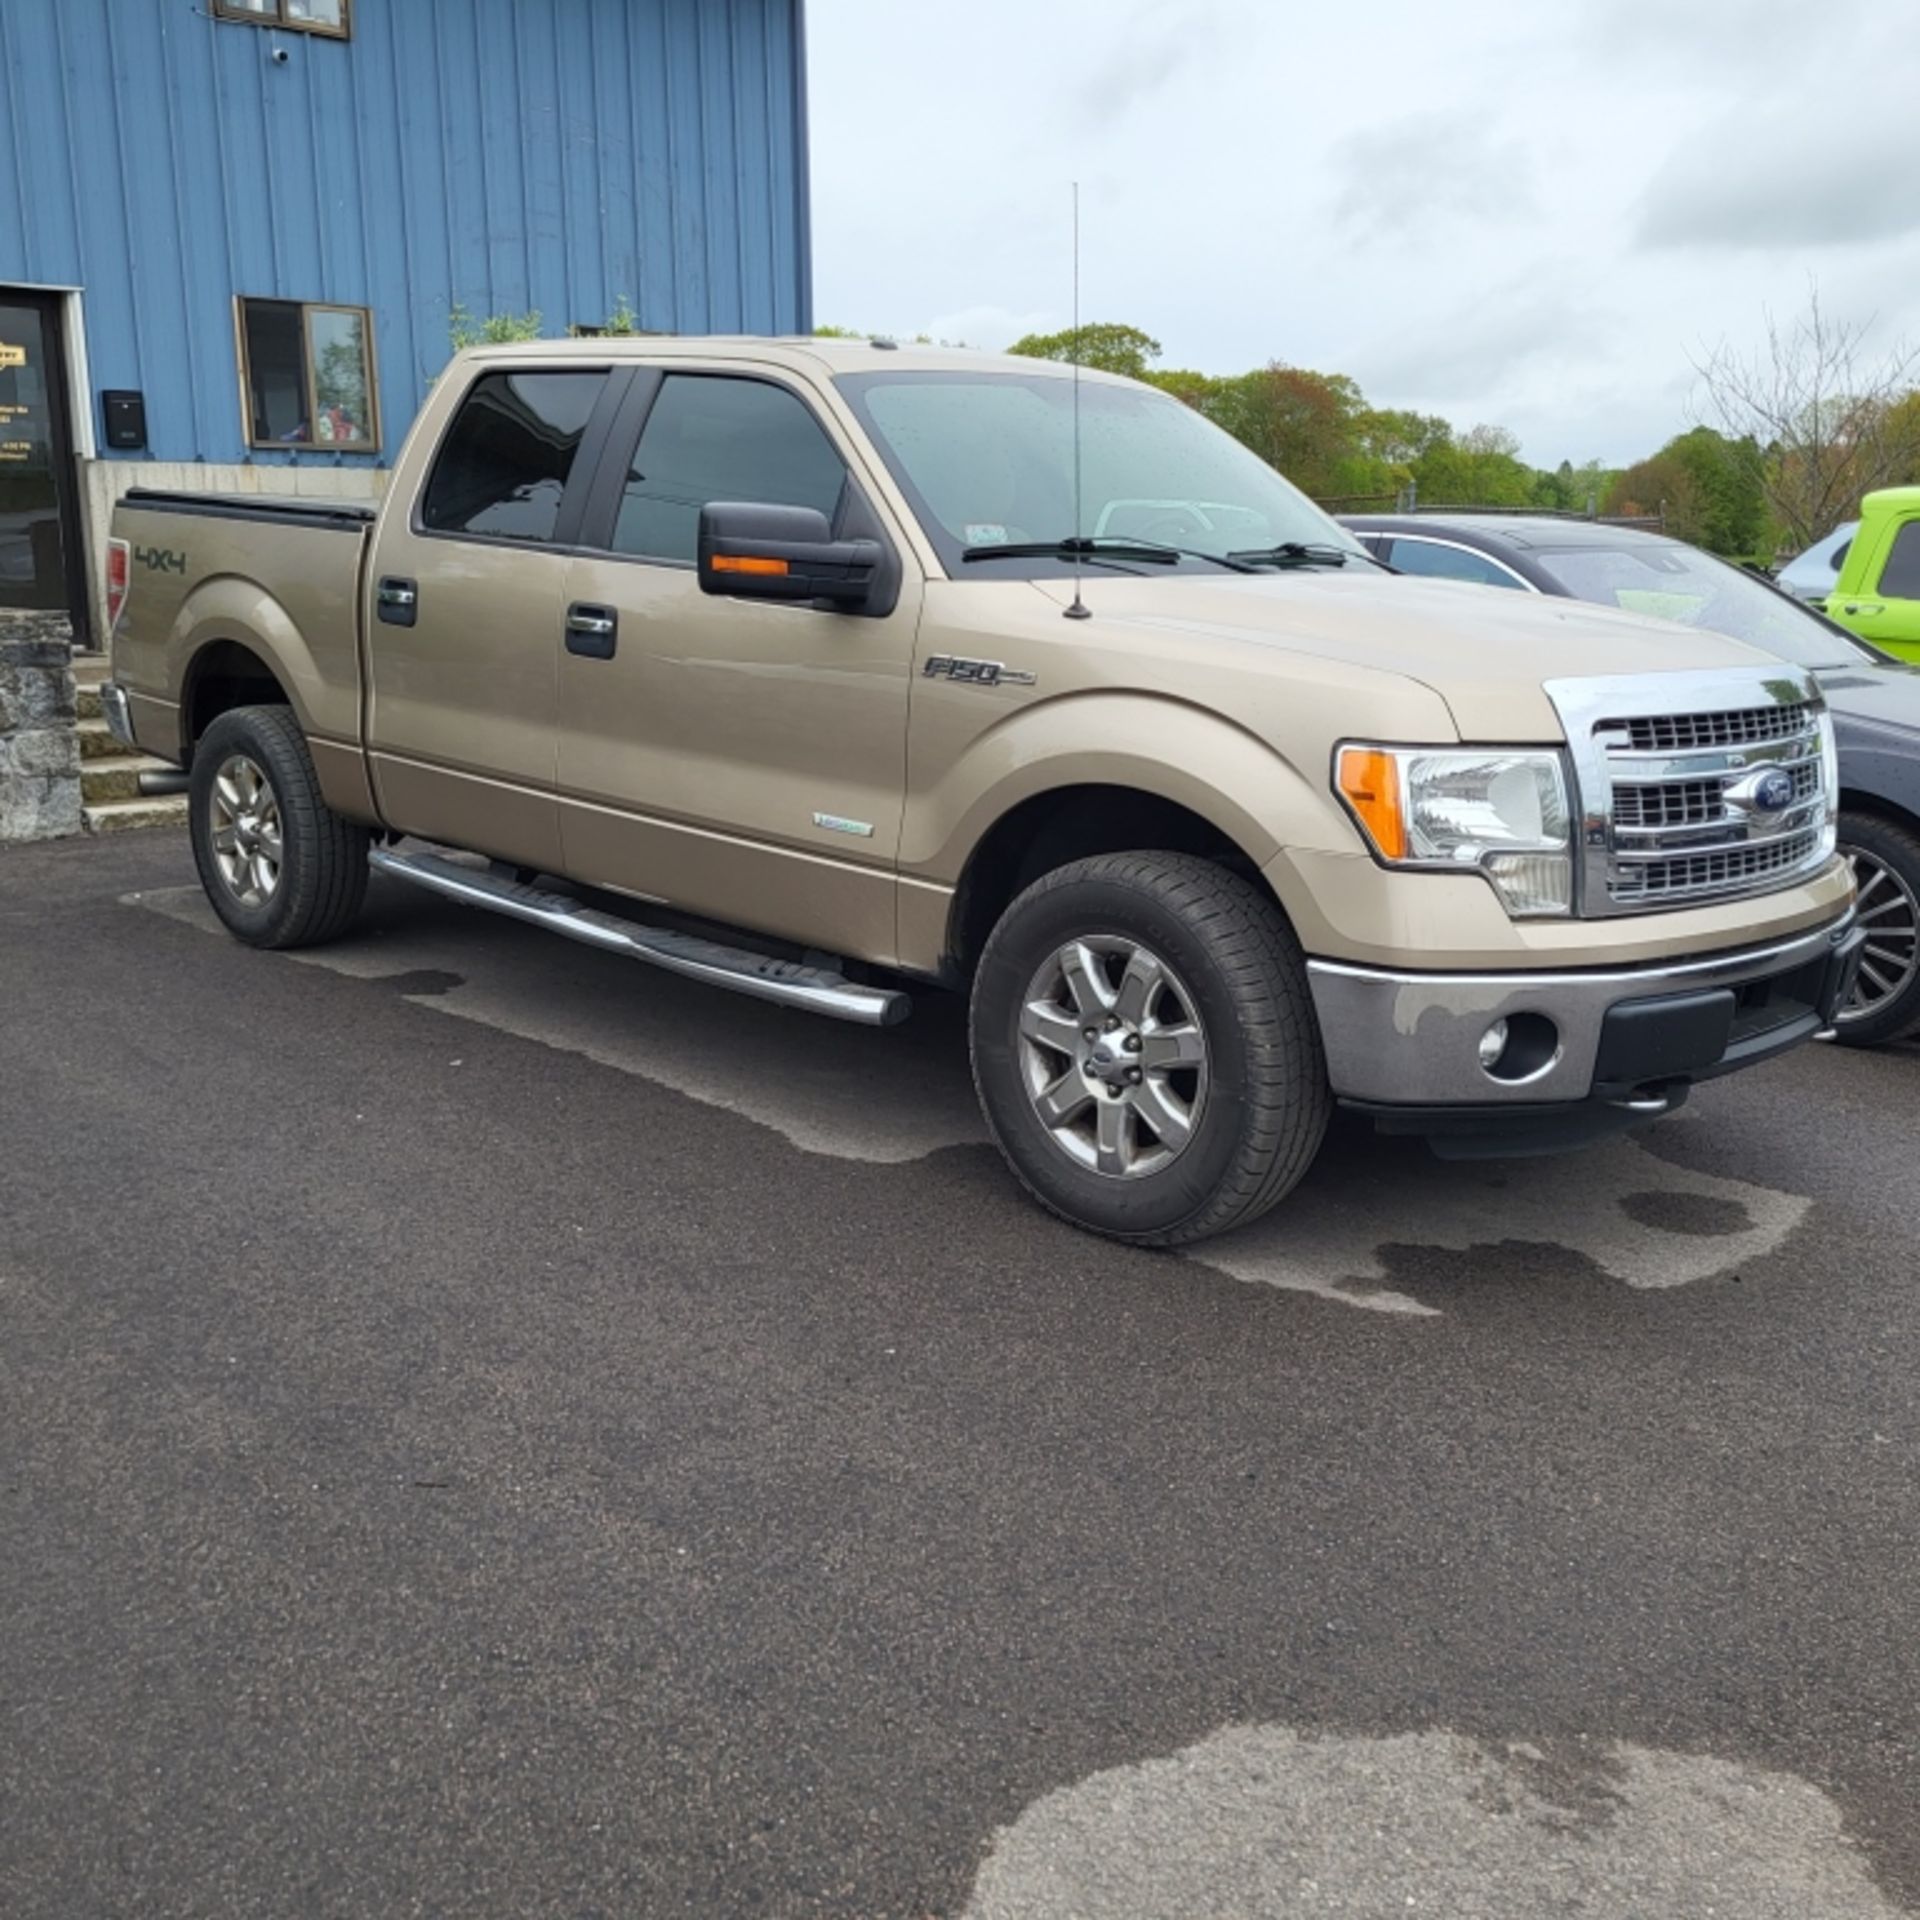 2014 Ford F150 Pickup - Image 4 of 20